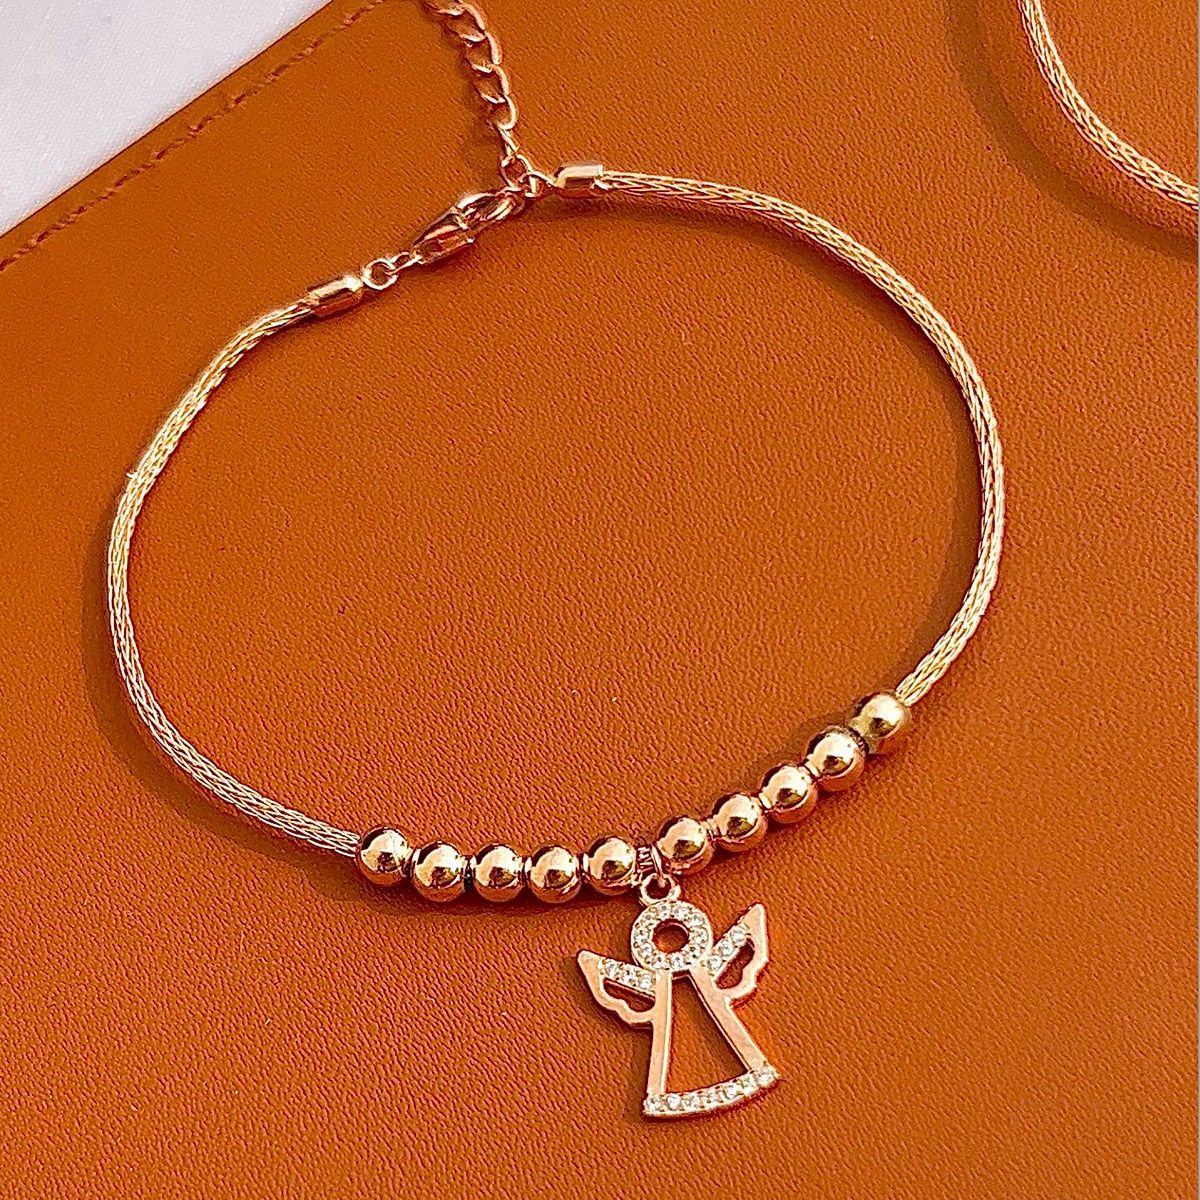 14K Gold Plated Cross Bracelet Baptism Christening and First Communion   Cherished Moments Jewelry